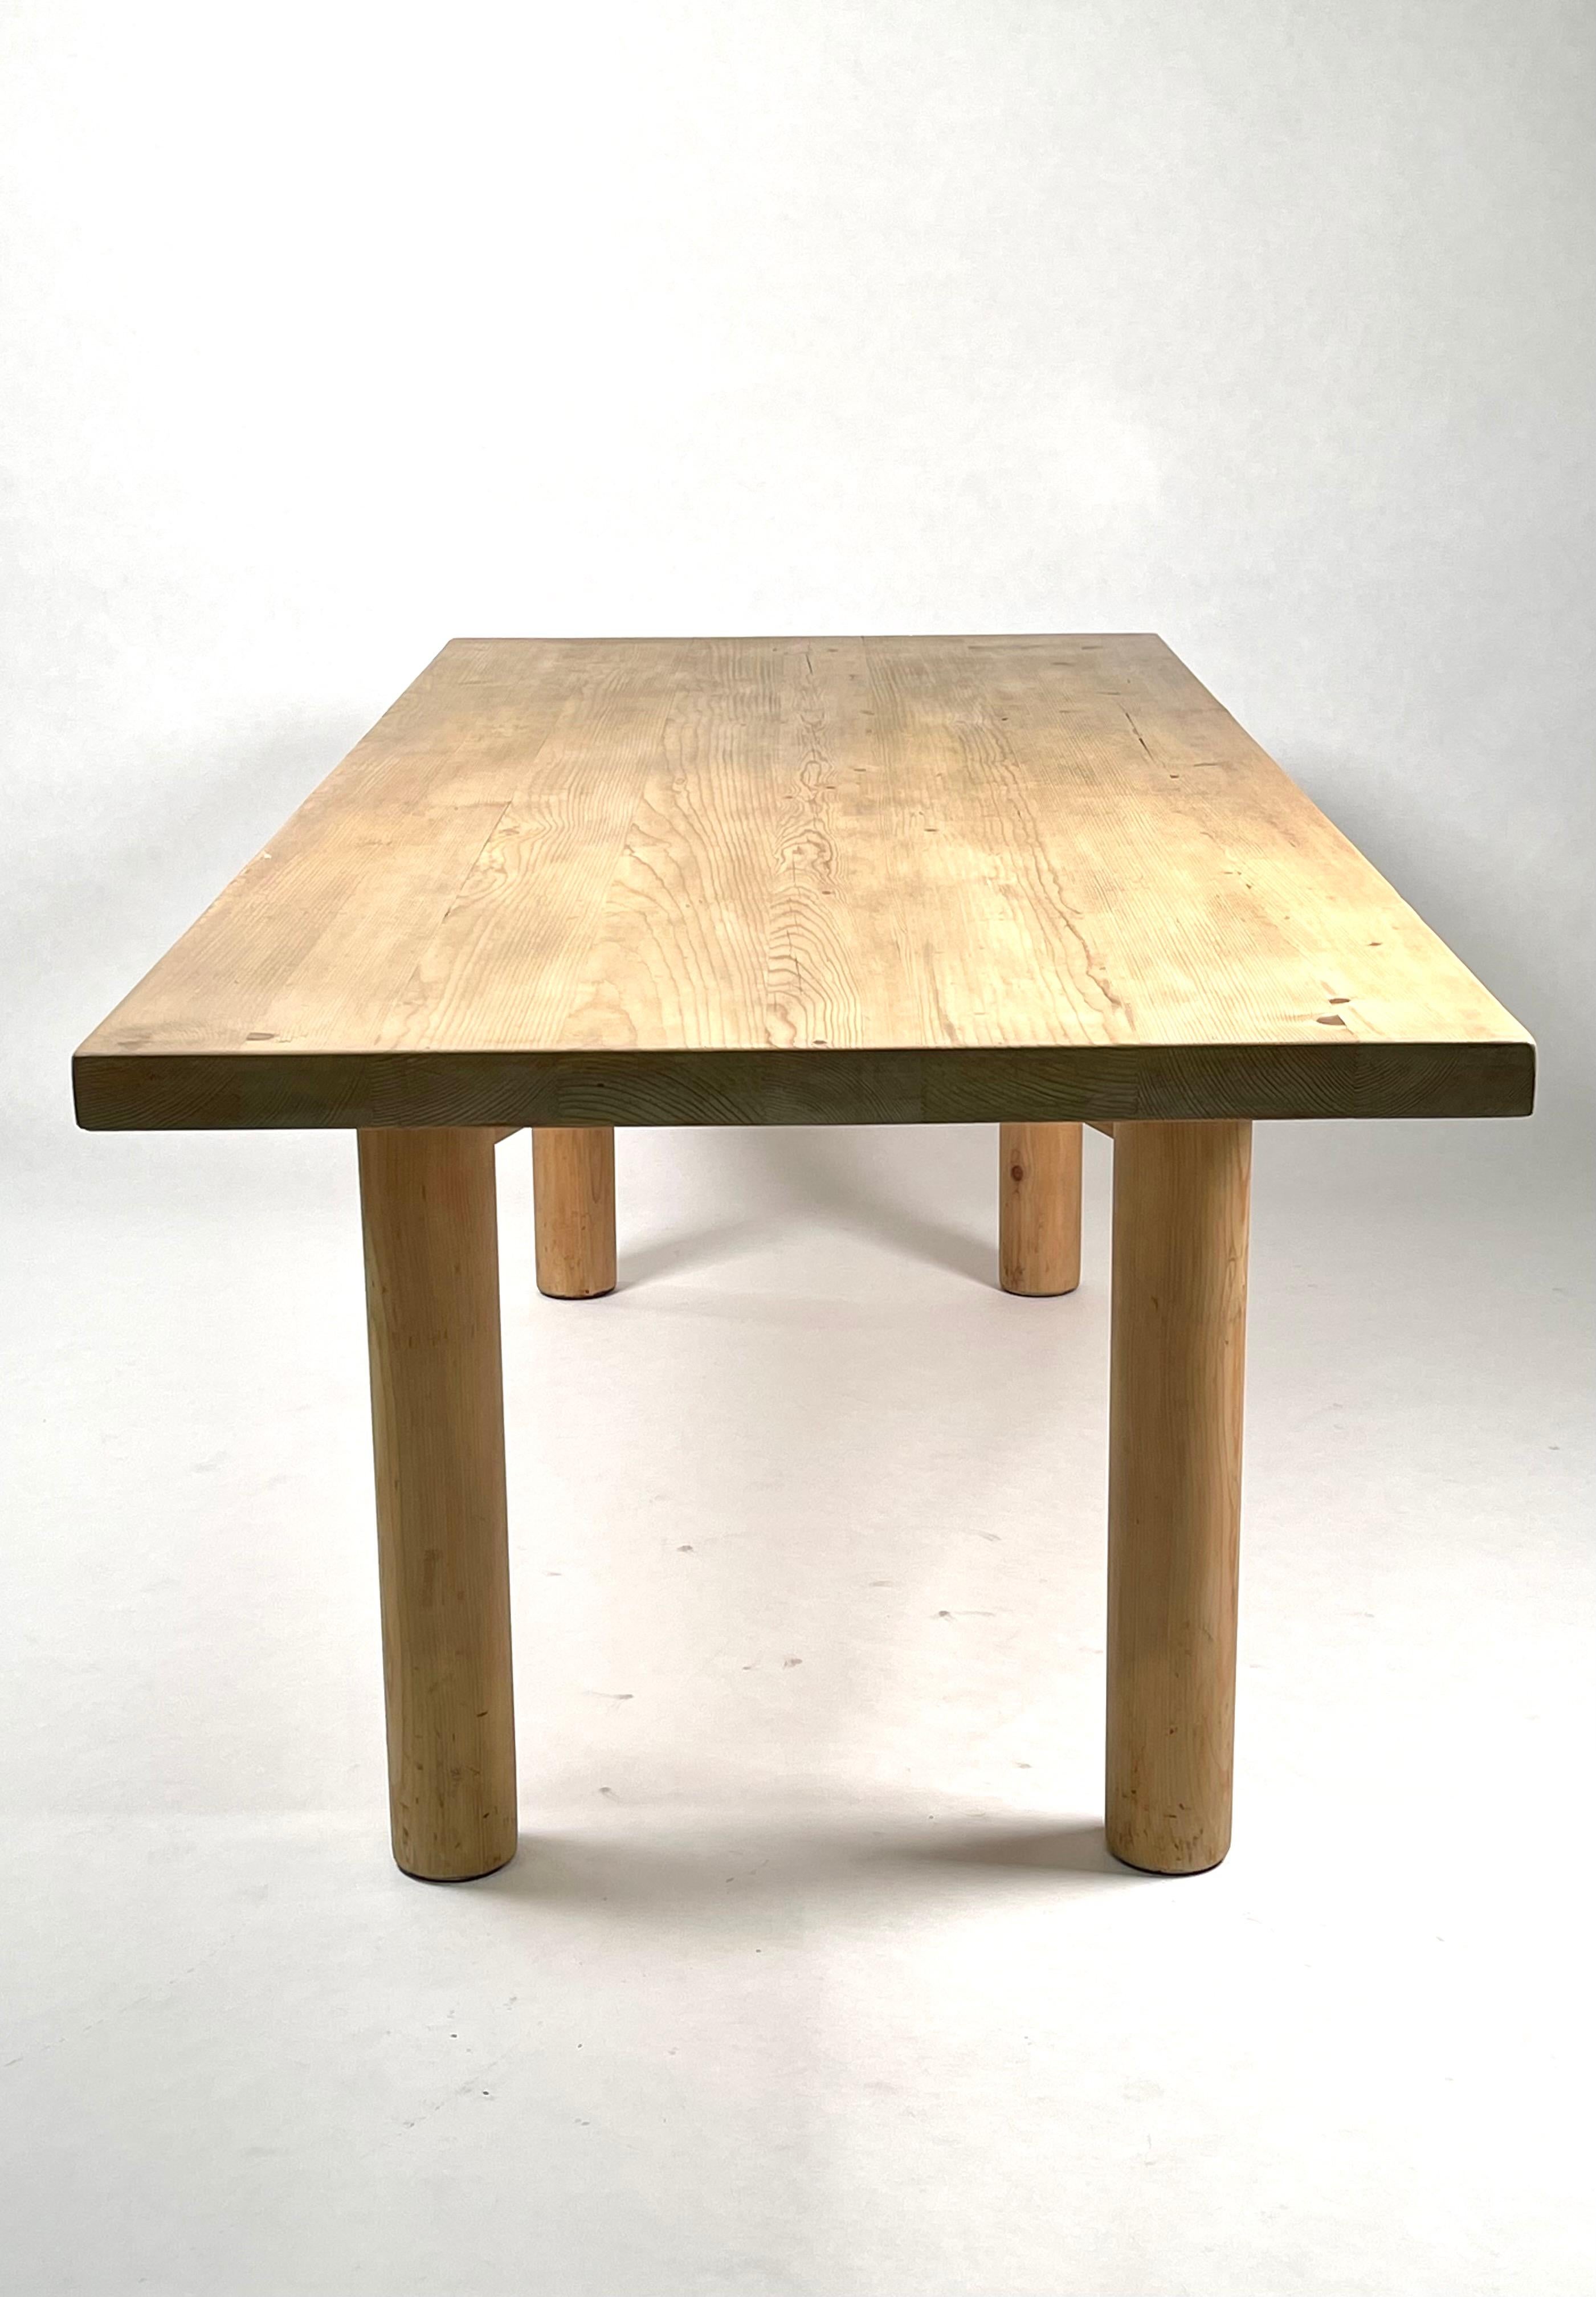 A large & rare dining table in solid acid stained pine.
Designed by Charlotte Perriand for the Méribel Ski resort.
Executed by René Martin, one of Charlotte Perriand's two cabinetmakers in Méribel-les-Allues, France, 1950.
The table has received